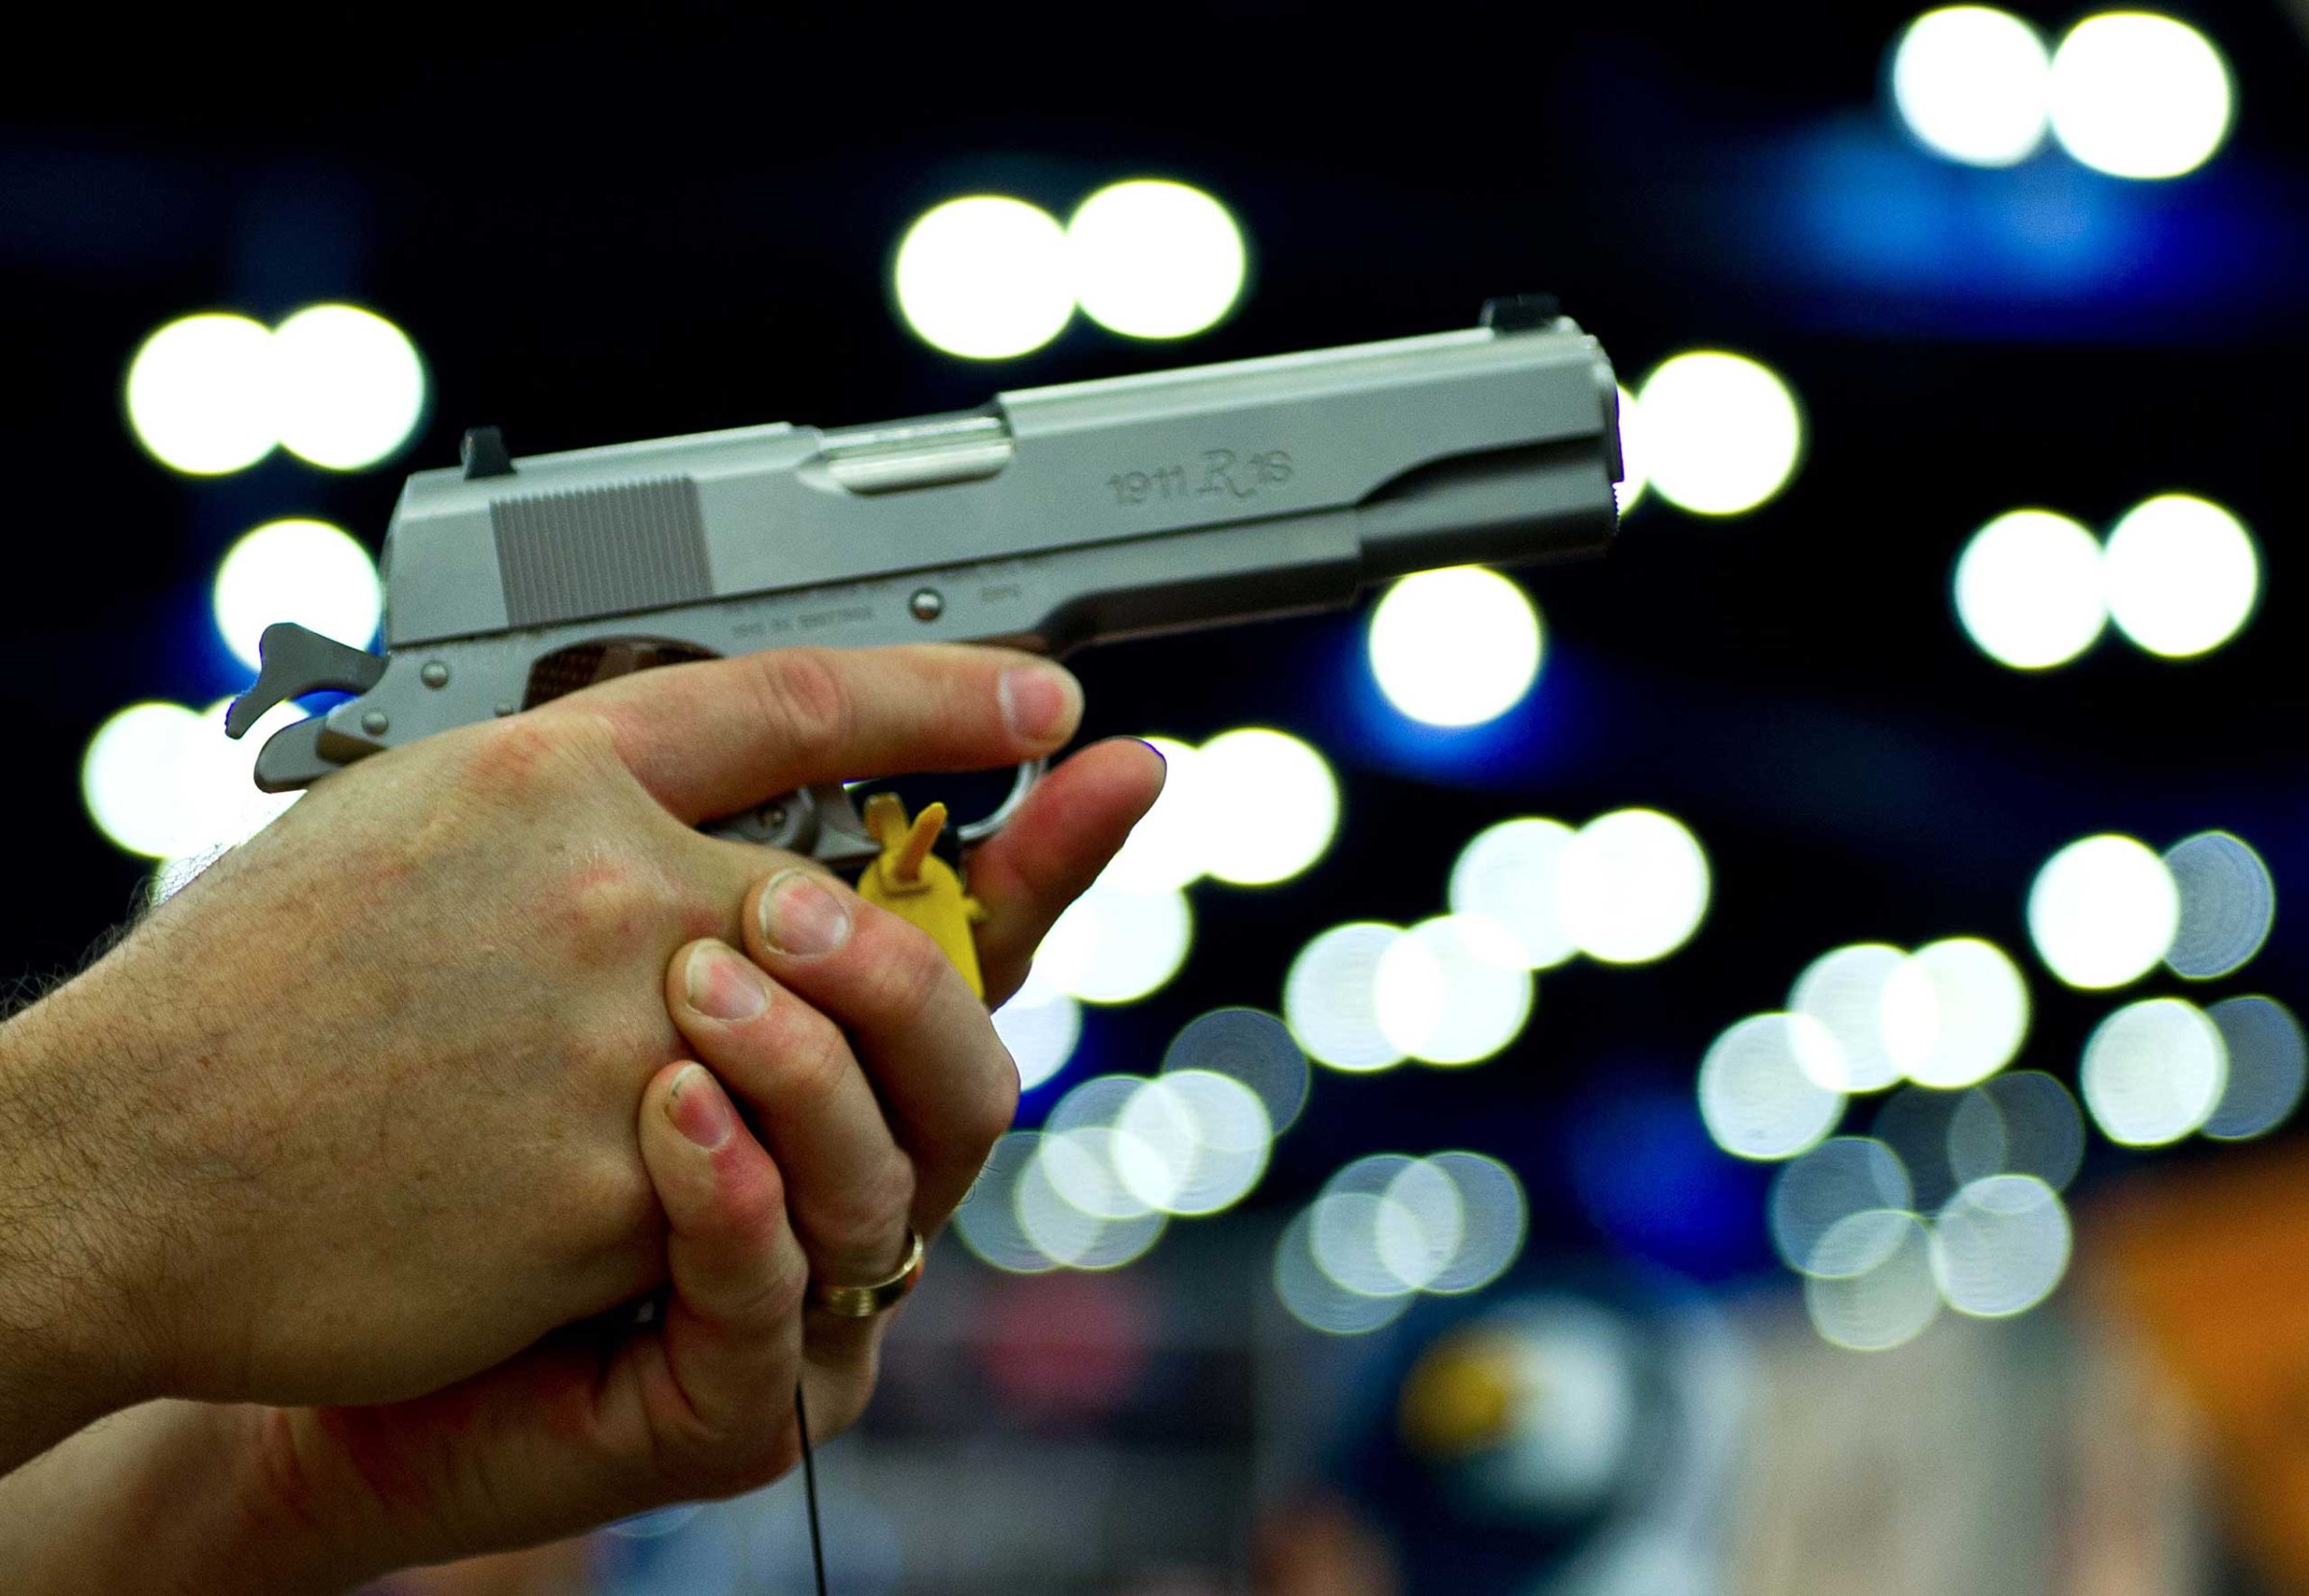 A convention goer handles a Ruger 1911 model semi-automatic pistol during the142nd annual National Rifle Association convention at the George R. Brown Convention Center on May 4, 2013 in Houston.